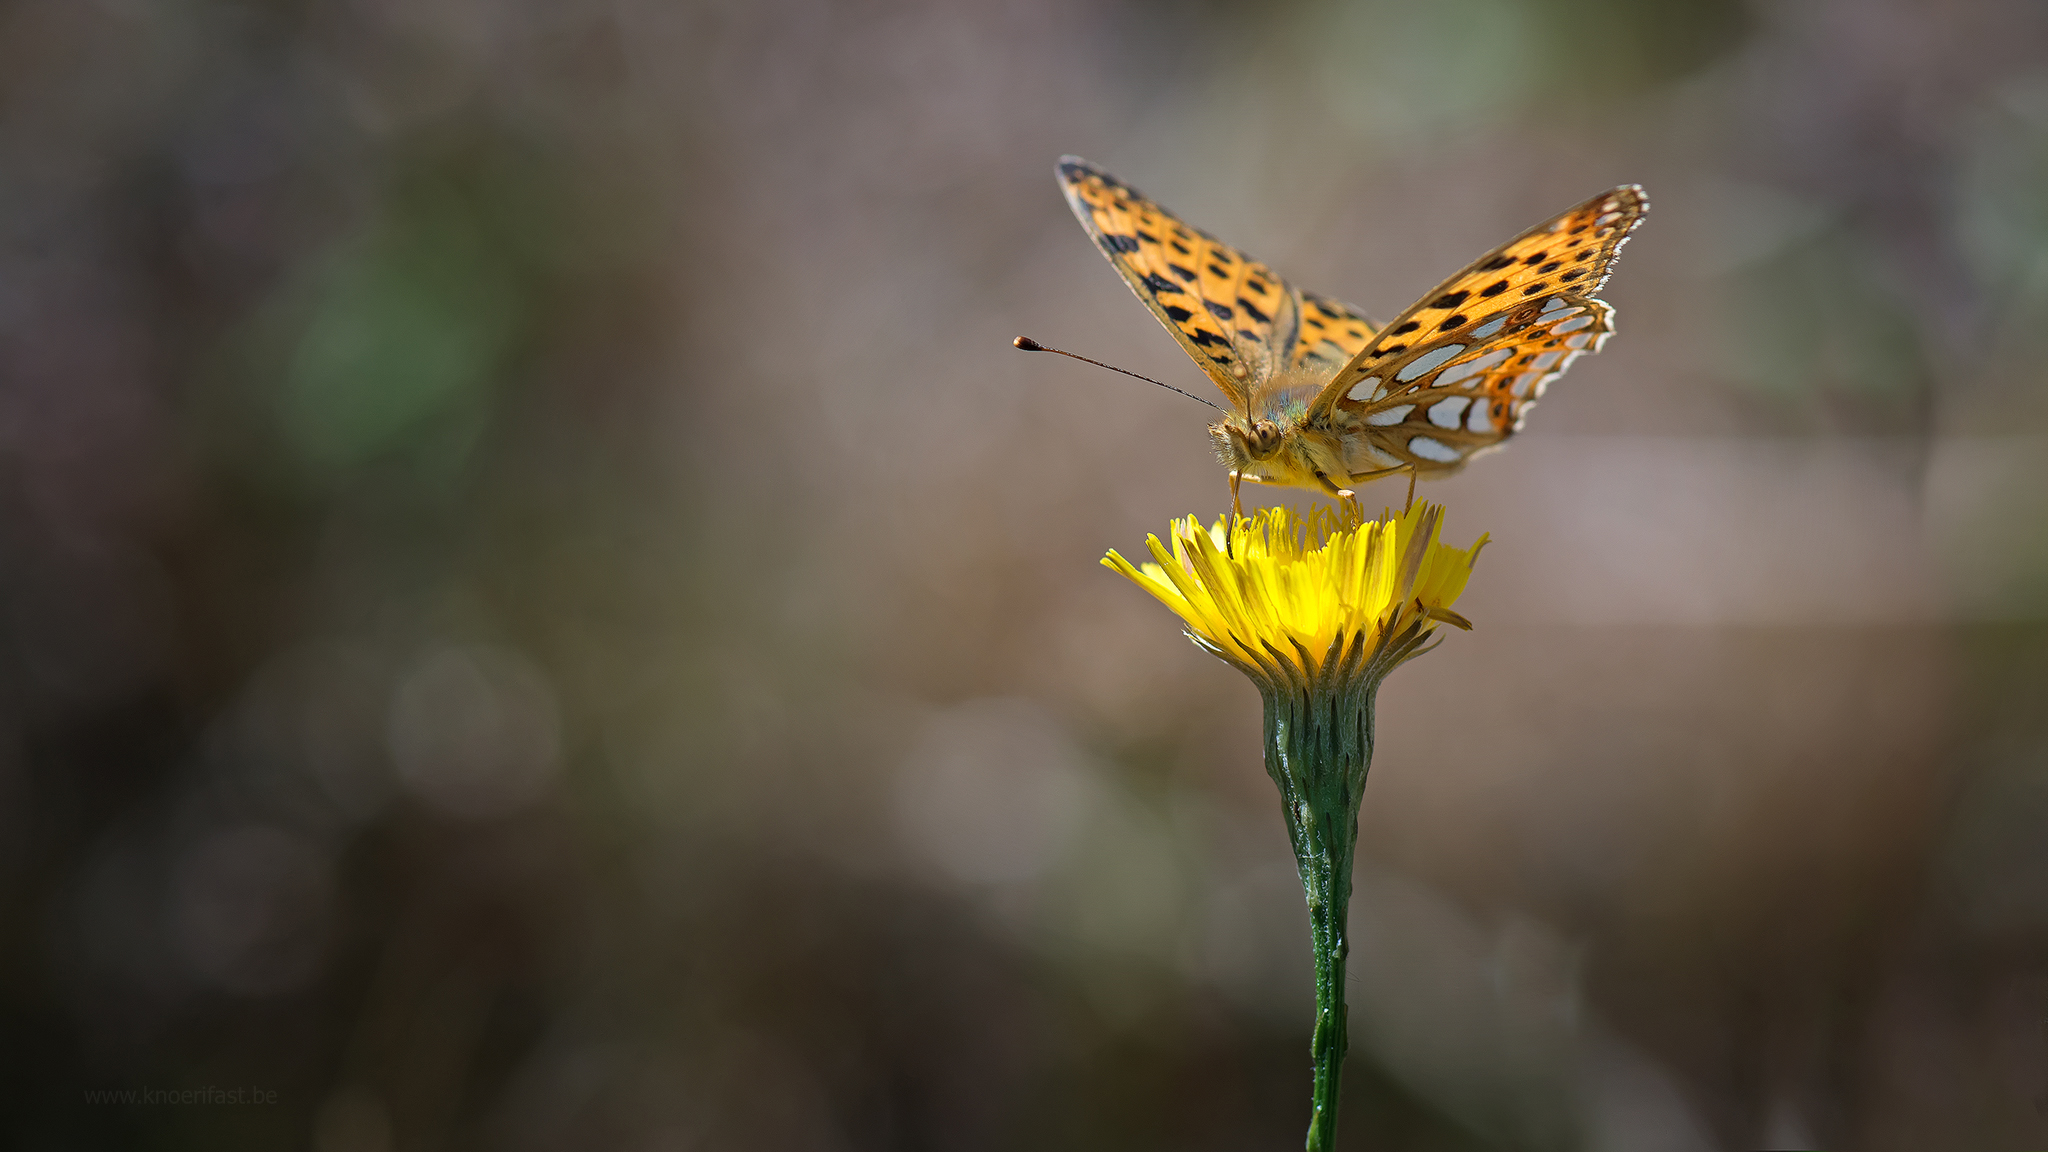 The Queen of Spain fritillary ...